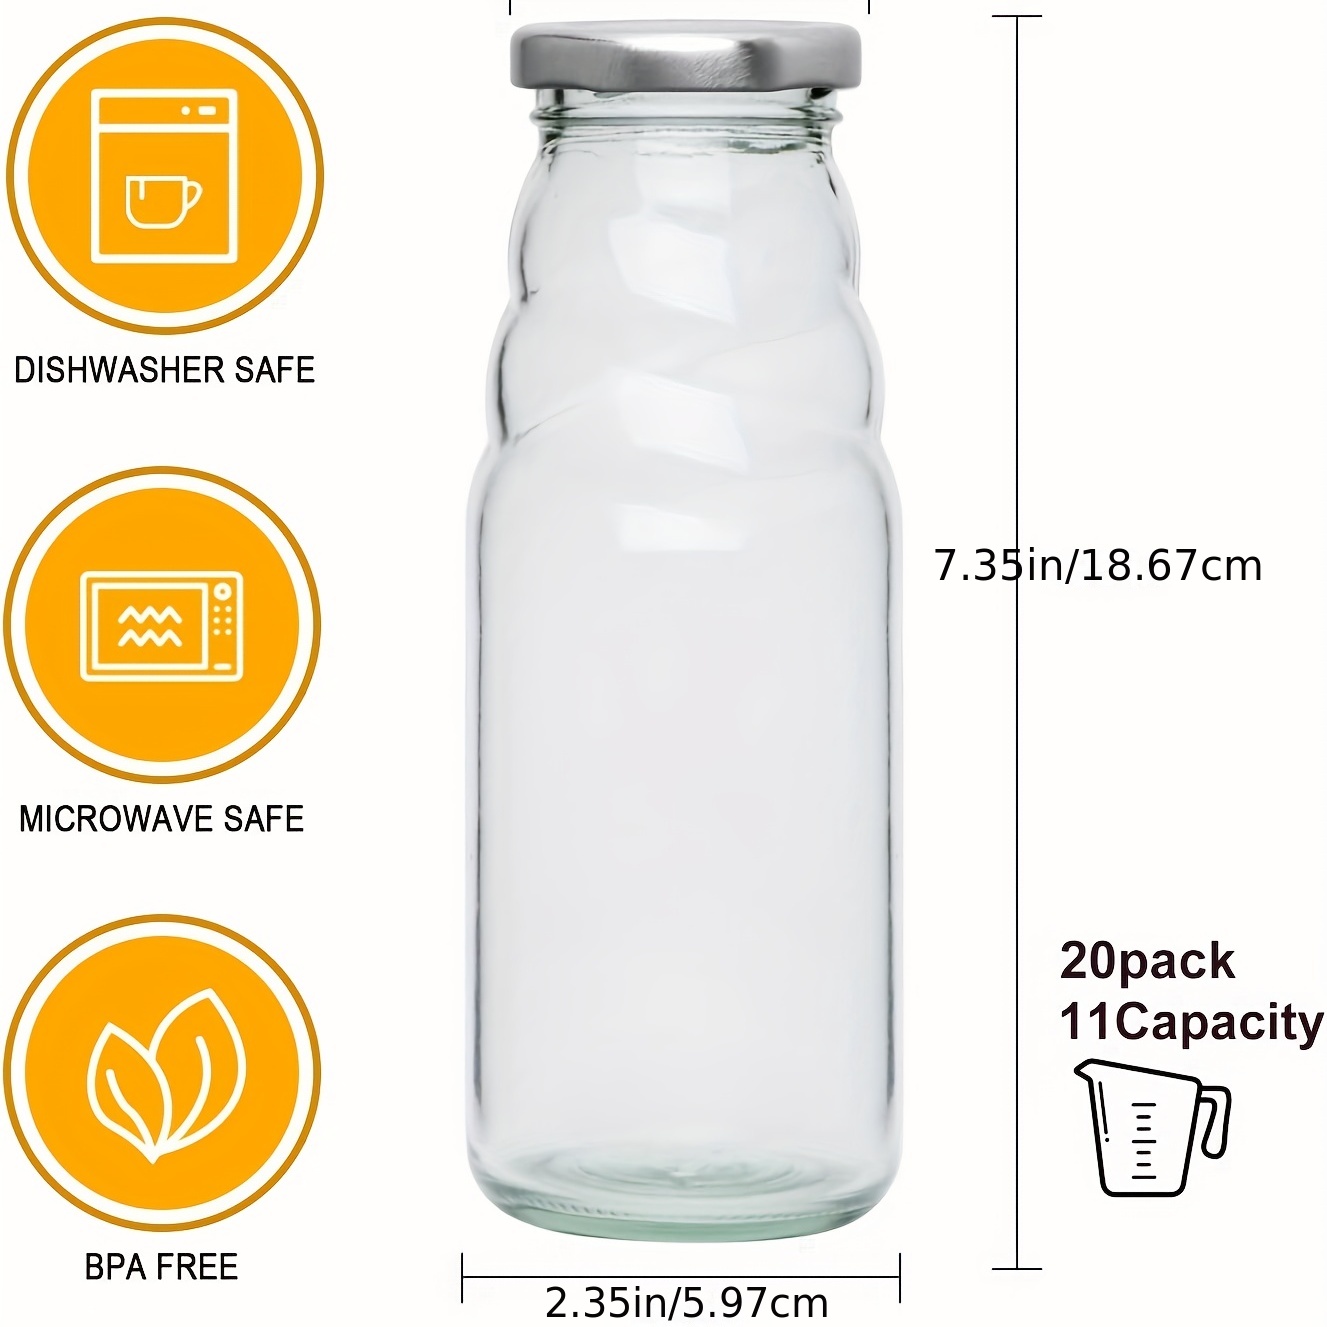 Glass Juice Bottle - Reliable Glass Bottles, Jars, Containers